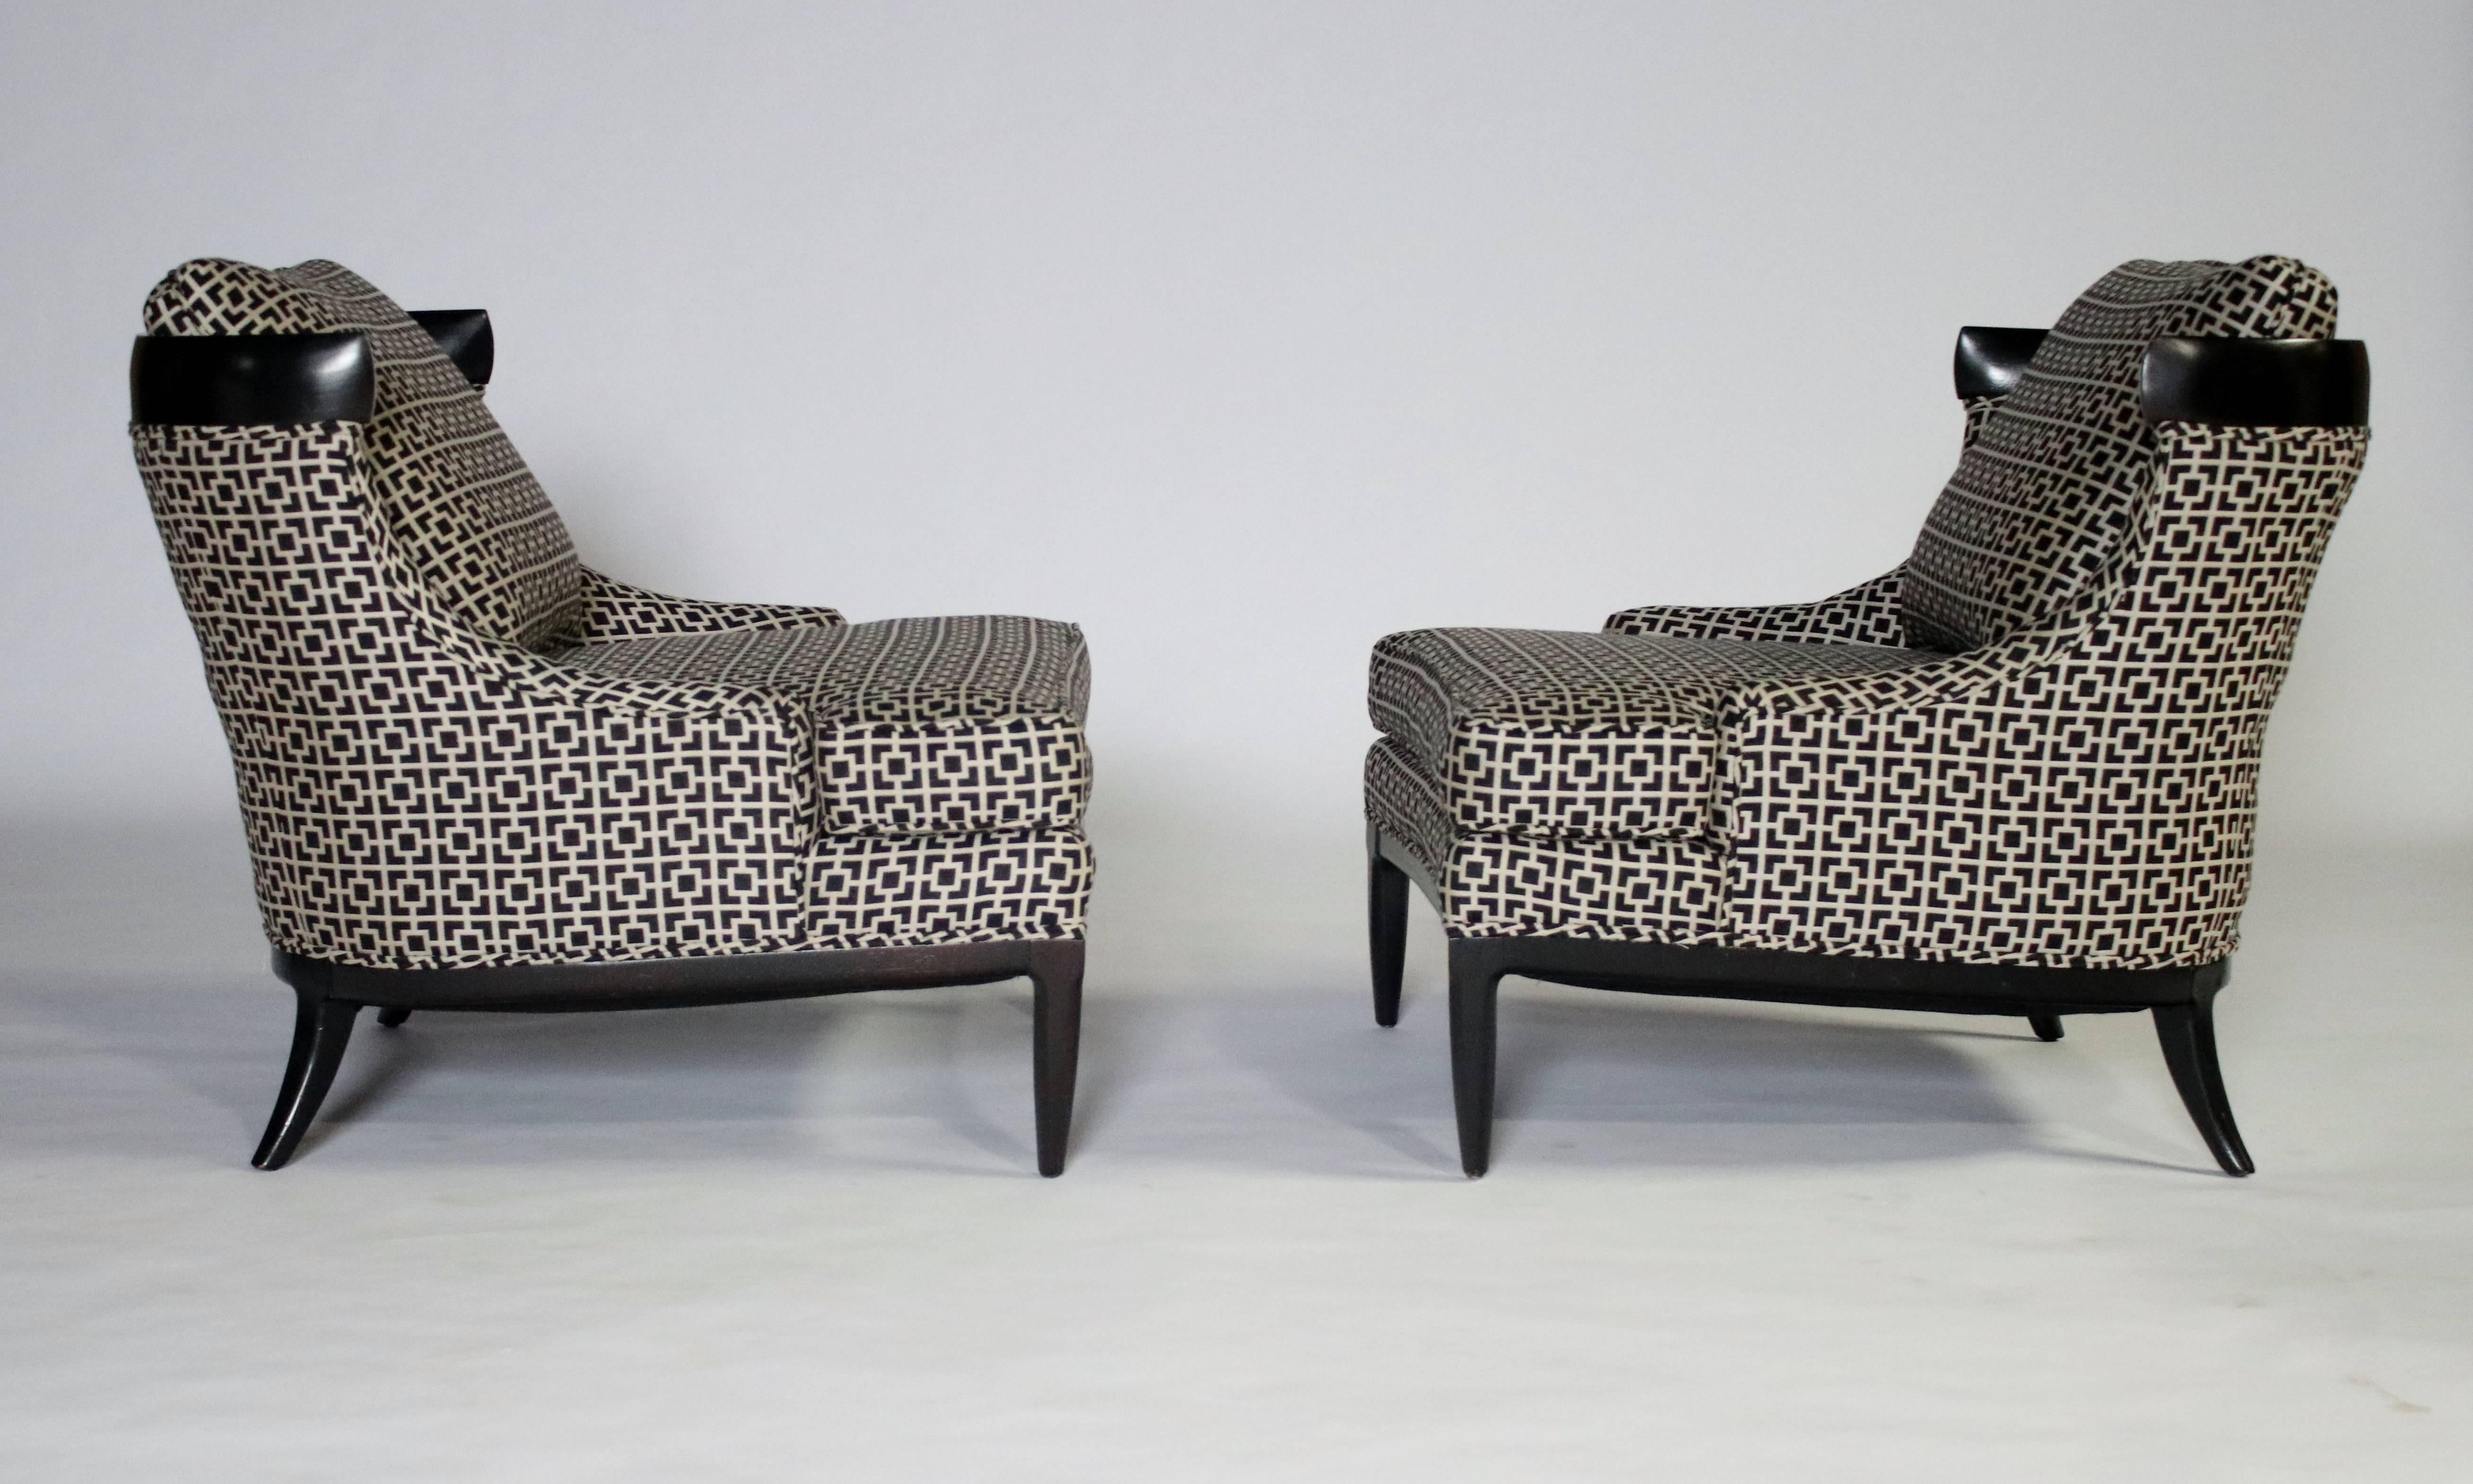 Pair of Tomlinson Sophisticate slipper chairs designed by Erwin Lambeth newly upholstered in Kravet black and white geometric fabric. Measures: Seat height 15